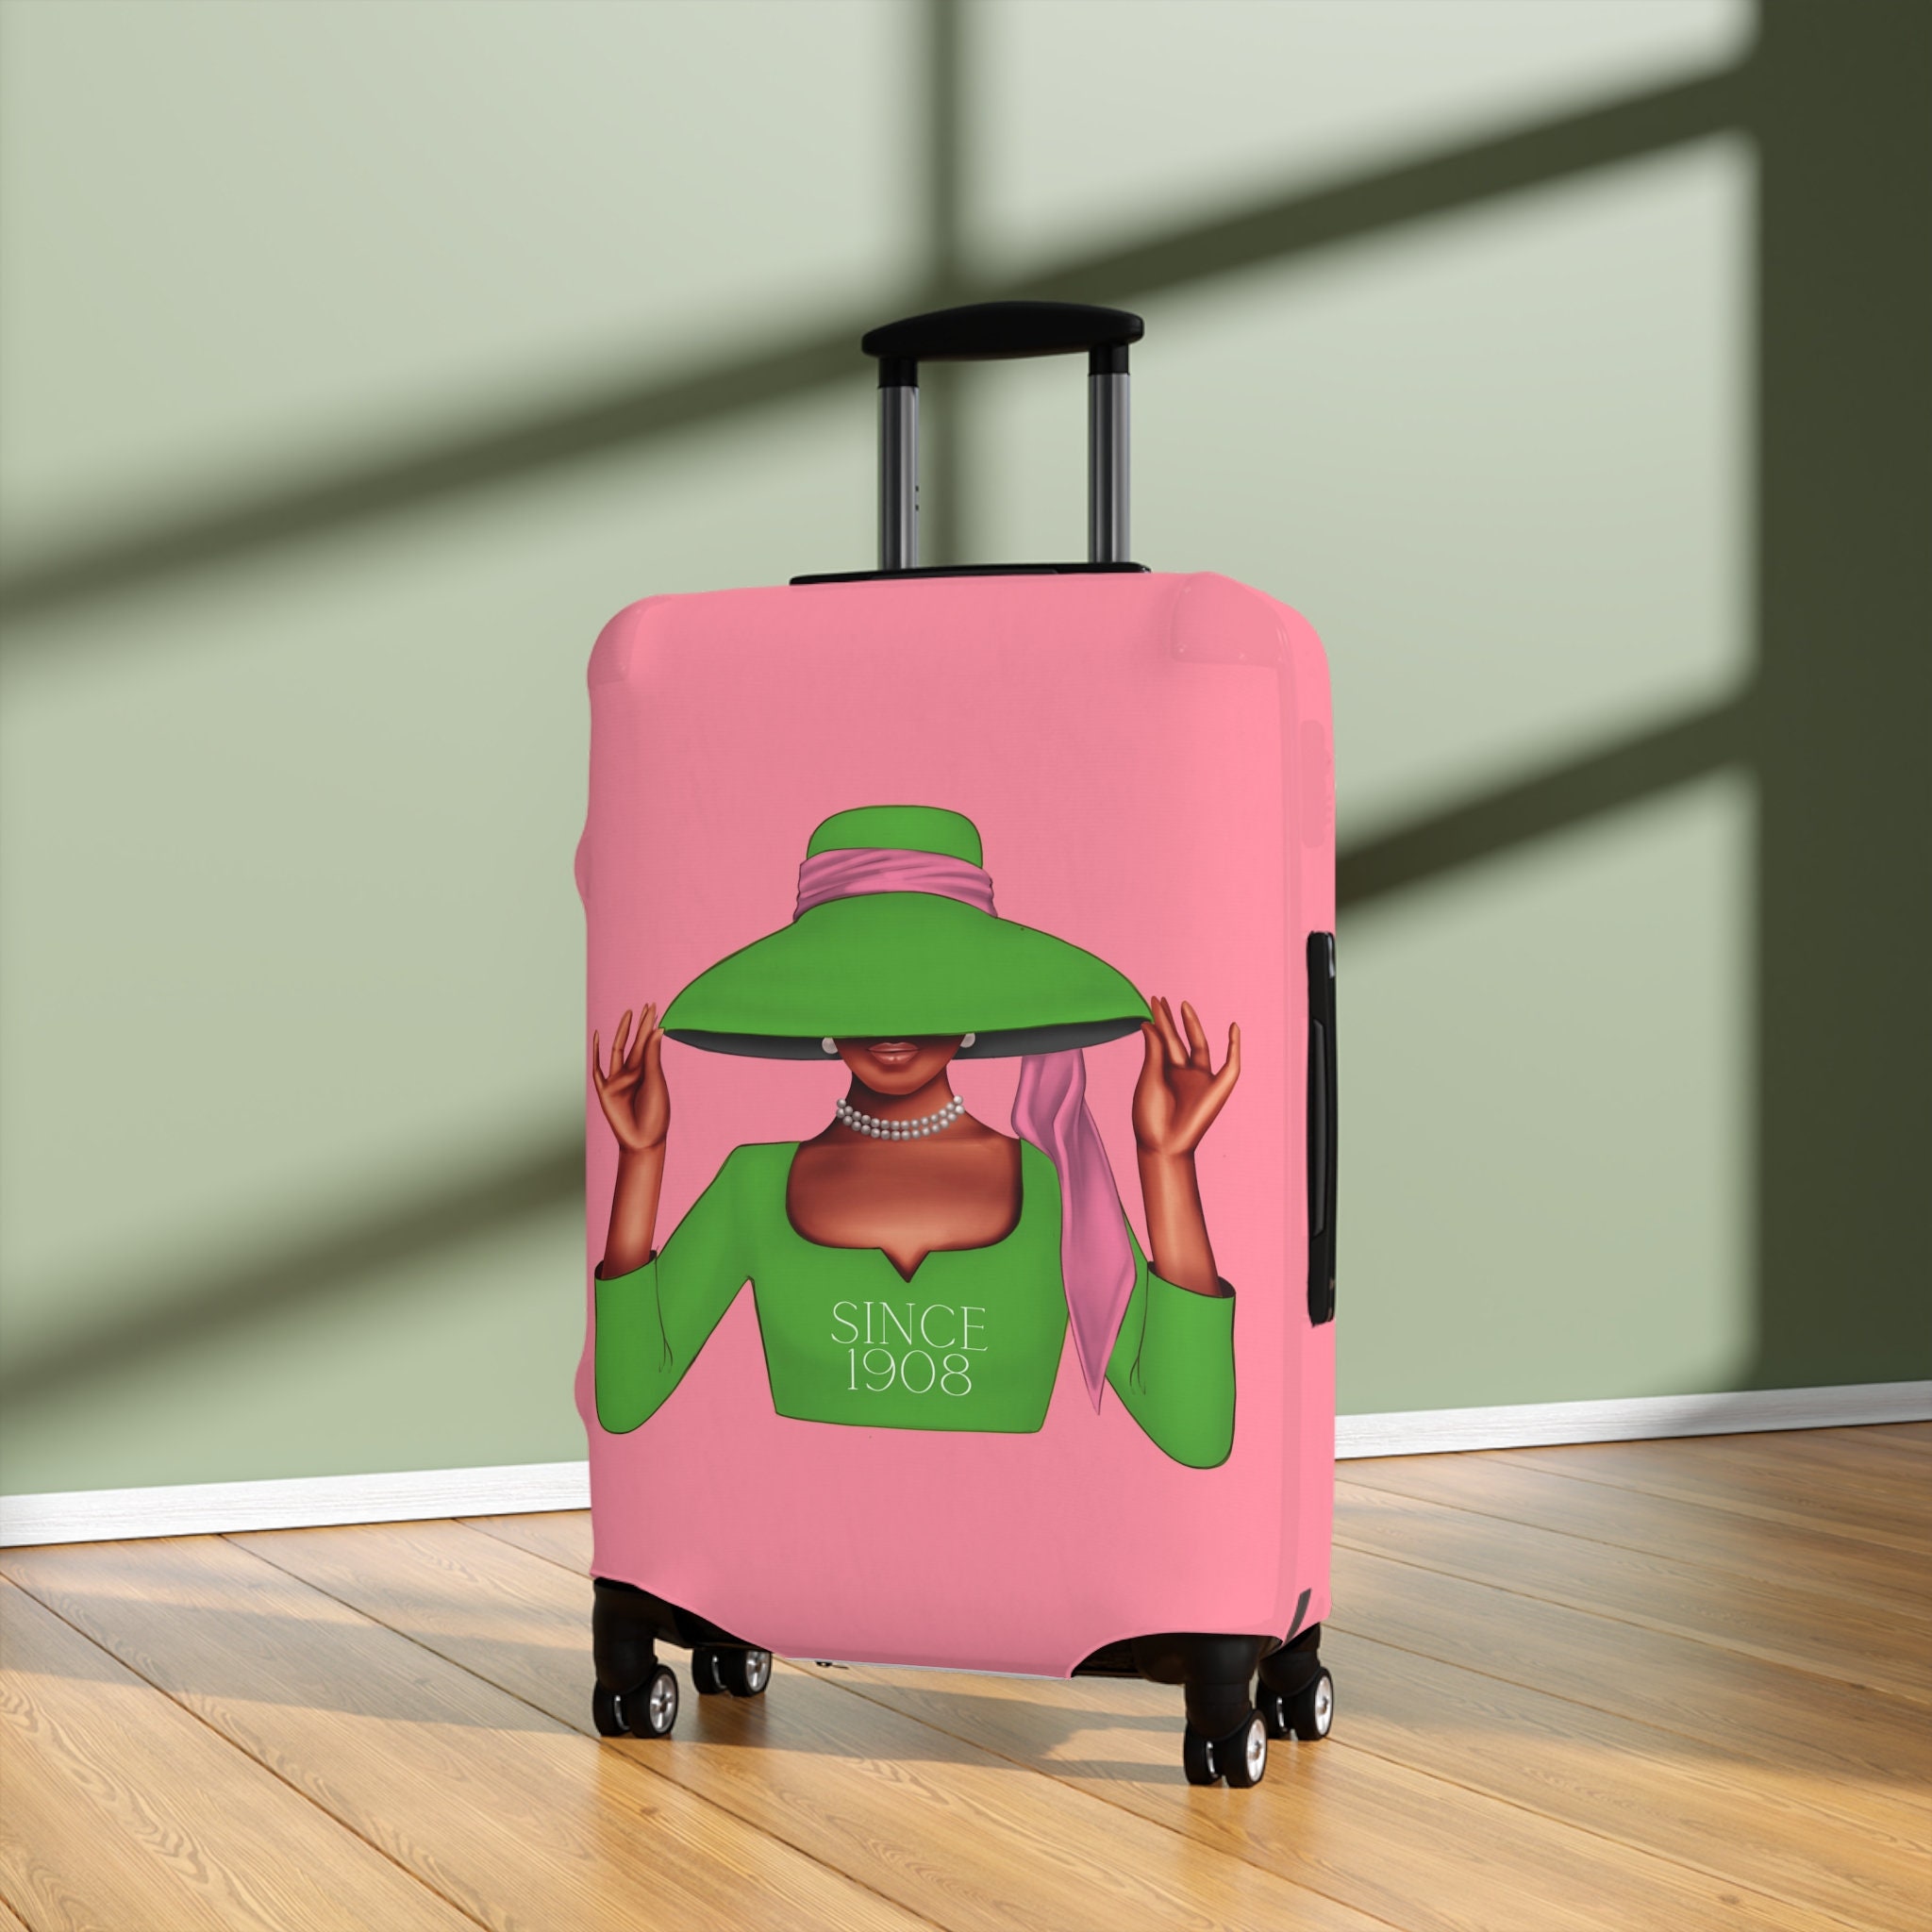 Since 1908 Salmon Pink Luggage Cover, AKA Inspired Luggage Cover